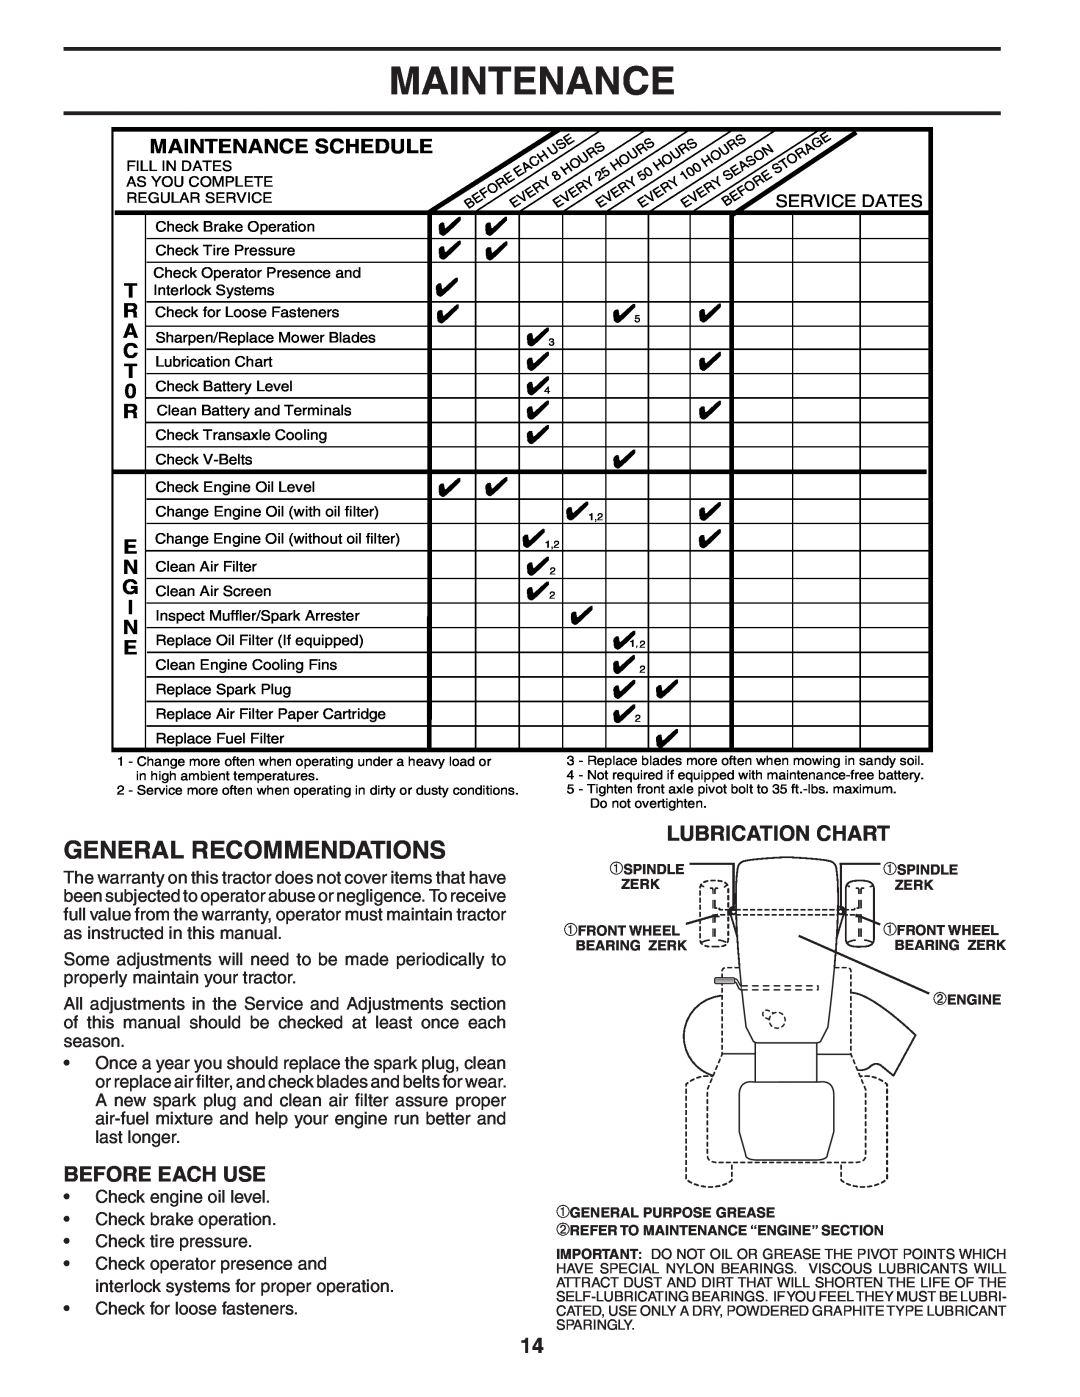 Weed Eater WE12538M manual General Recommendations, Lubrication Chart, Before Each Use, Maintenance Schedule 